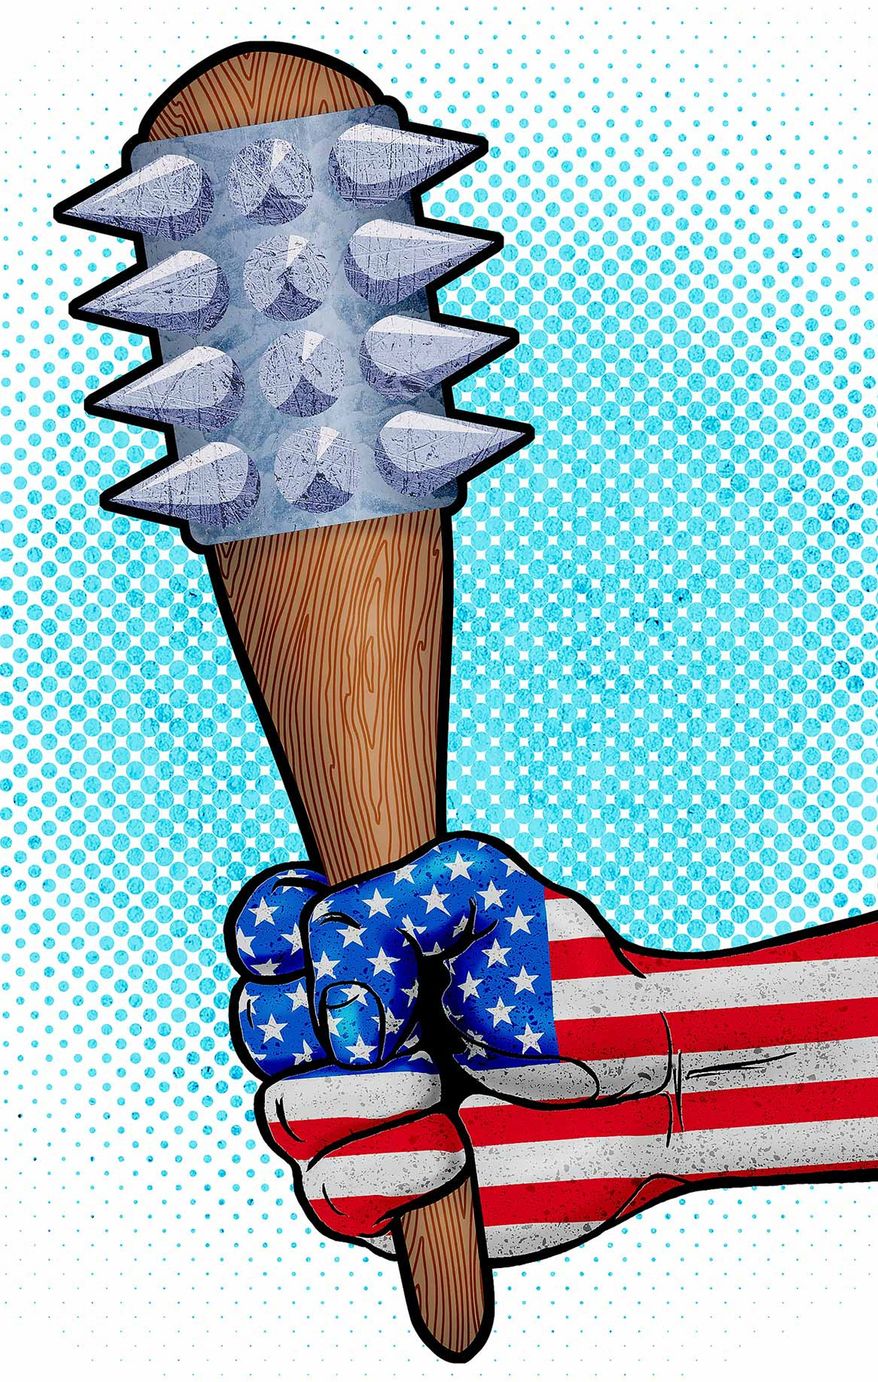 America embrace peace through strength illustration by Greg Groesch / The Washington Times